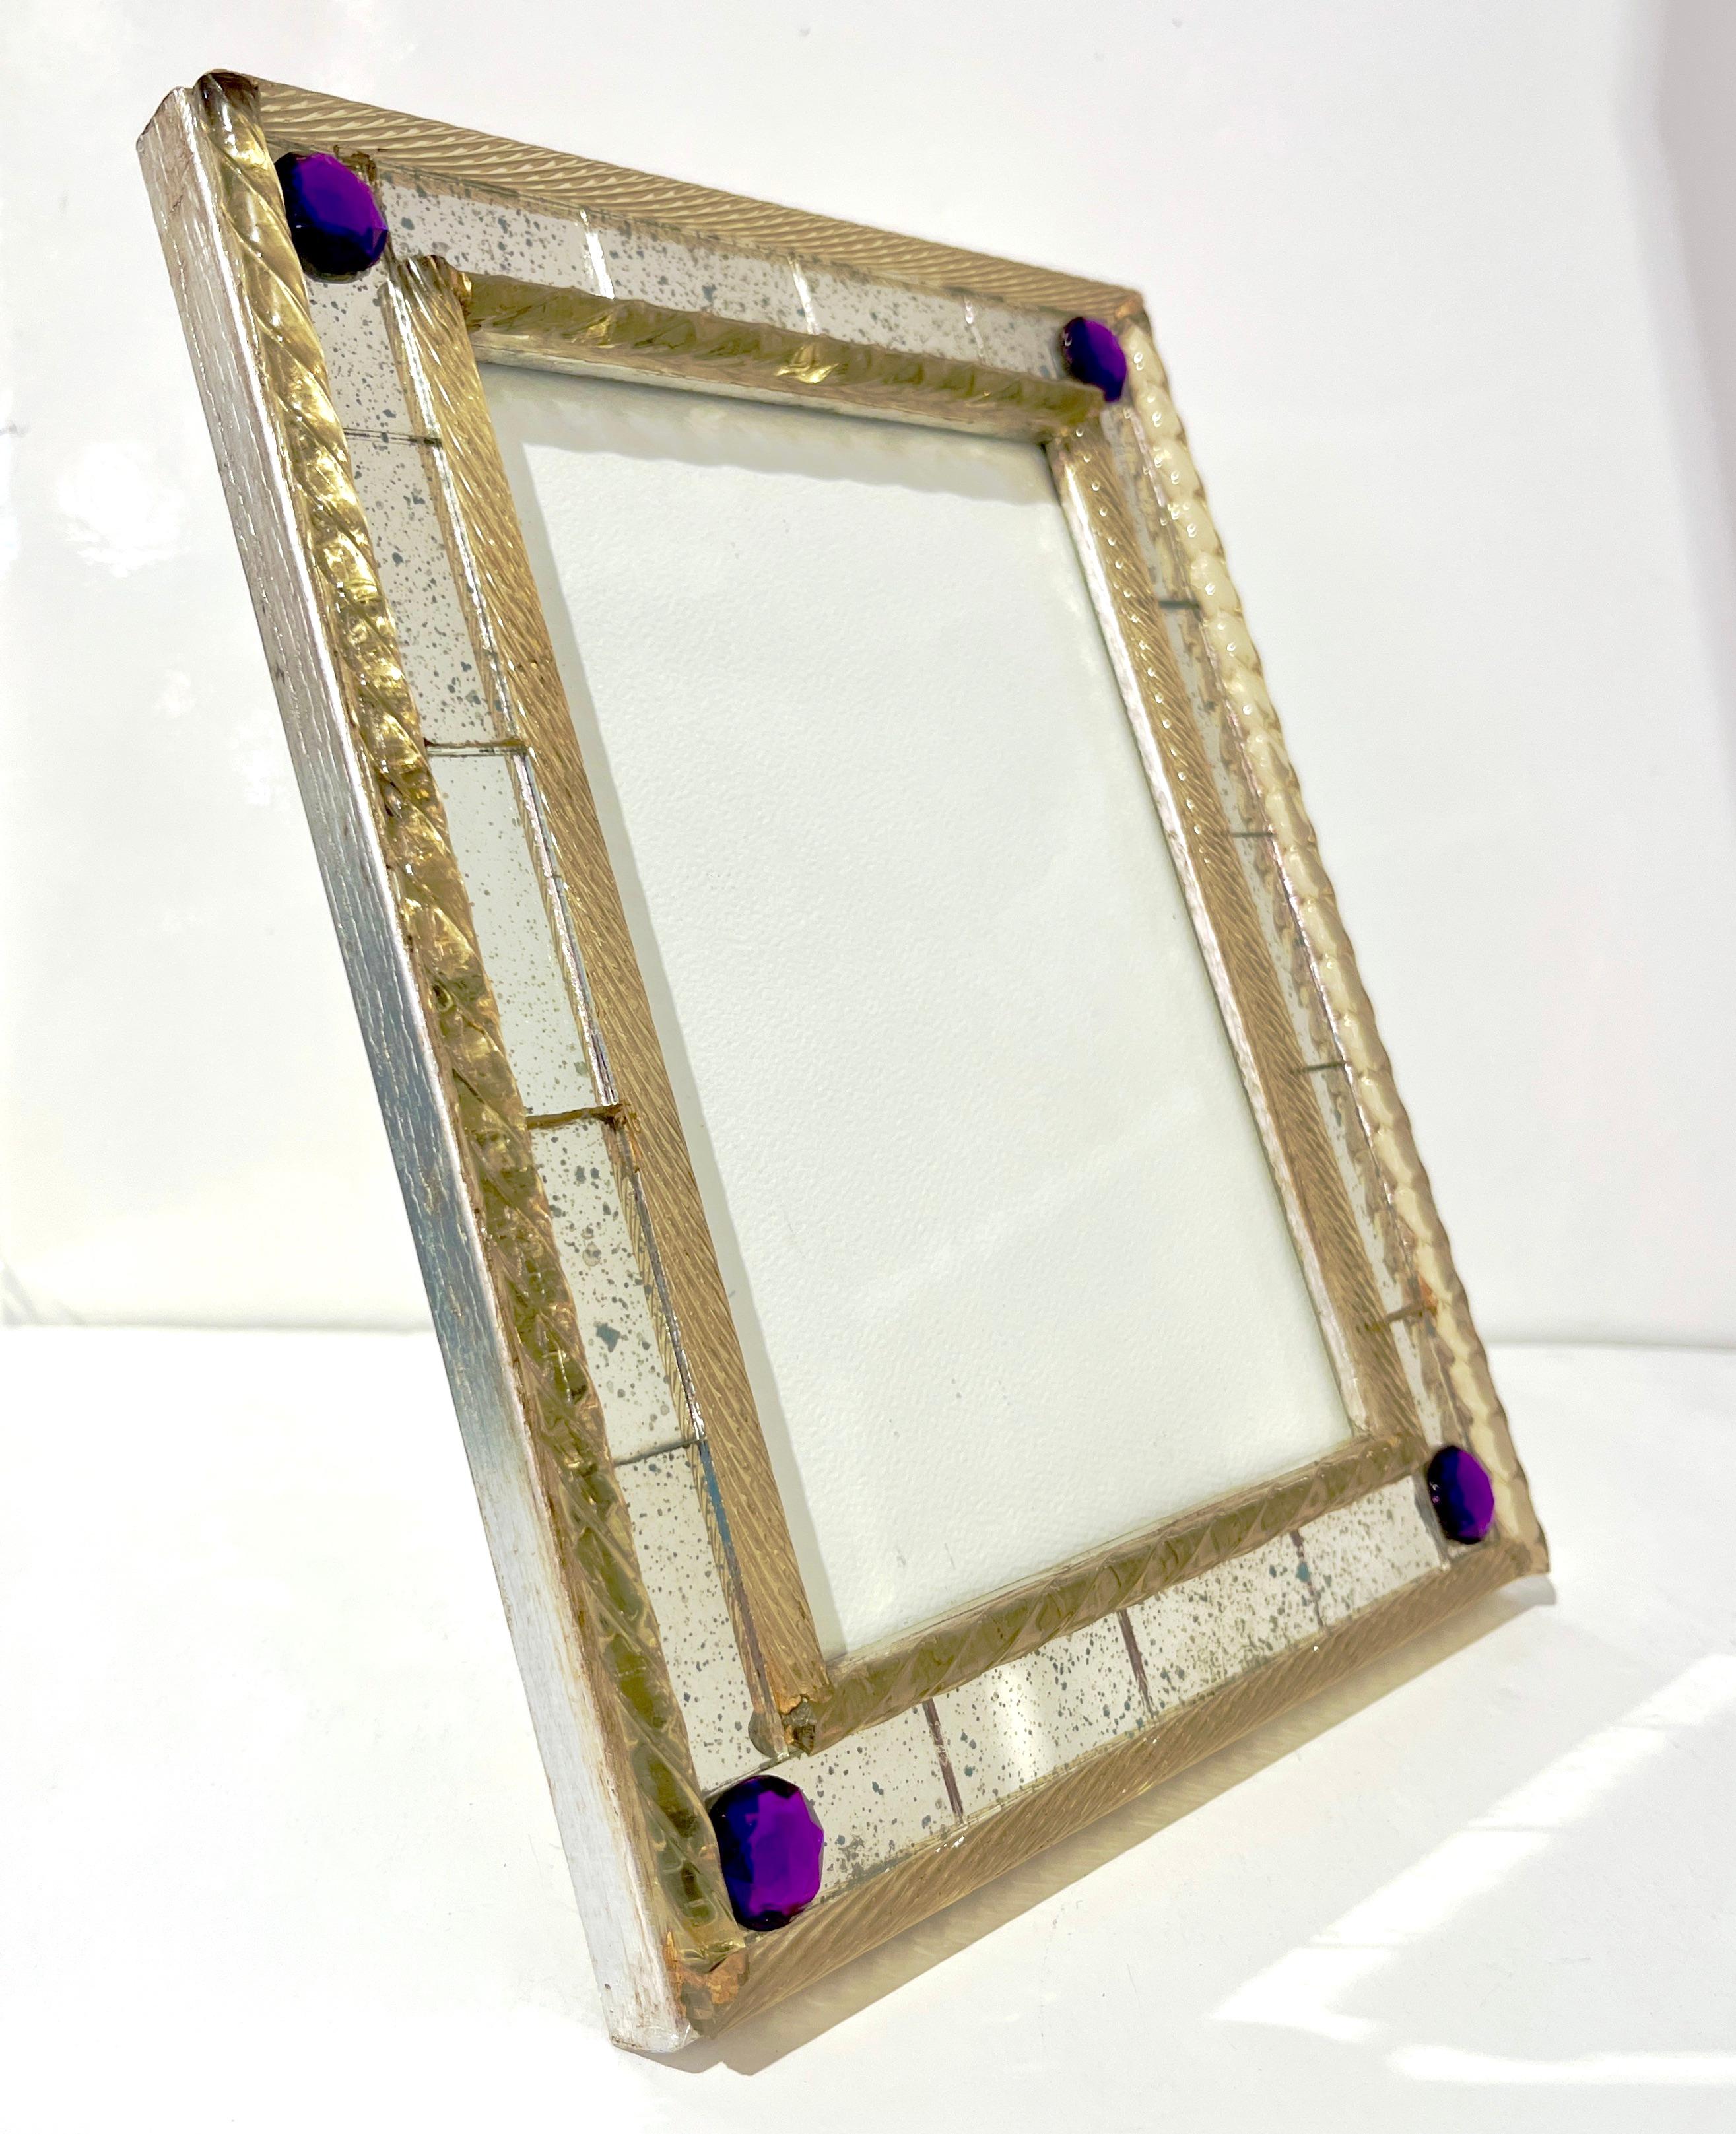 A 1960s elegant Italian vintage picture frame to add style and simple sophistication to any room. The vintage speckled mirrored frame is double-edged in relief by twisted amber glass baguettes with two different types of twists and decorated at each